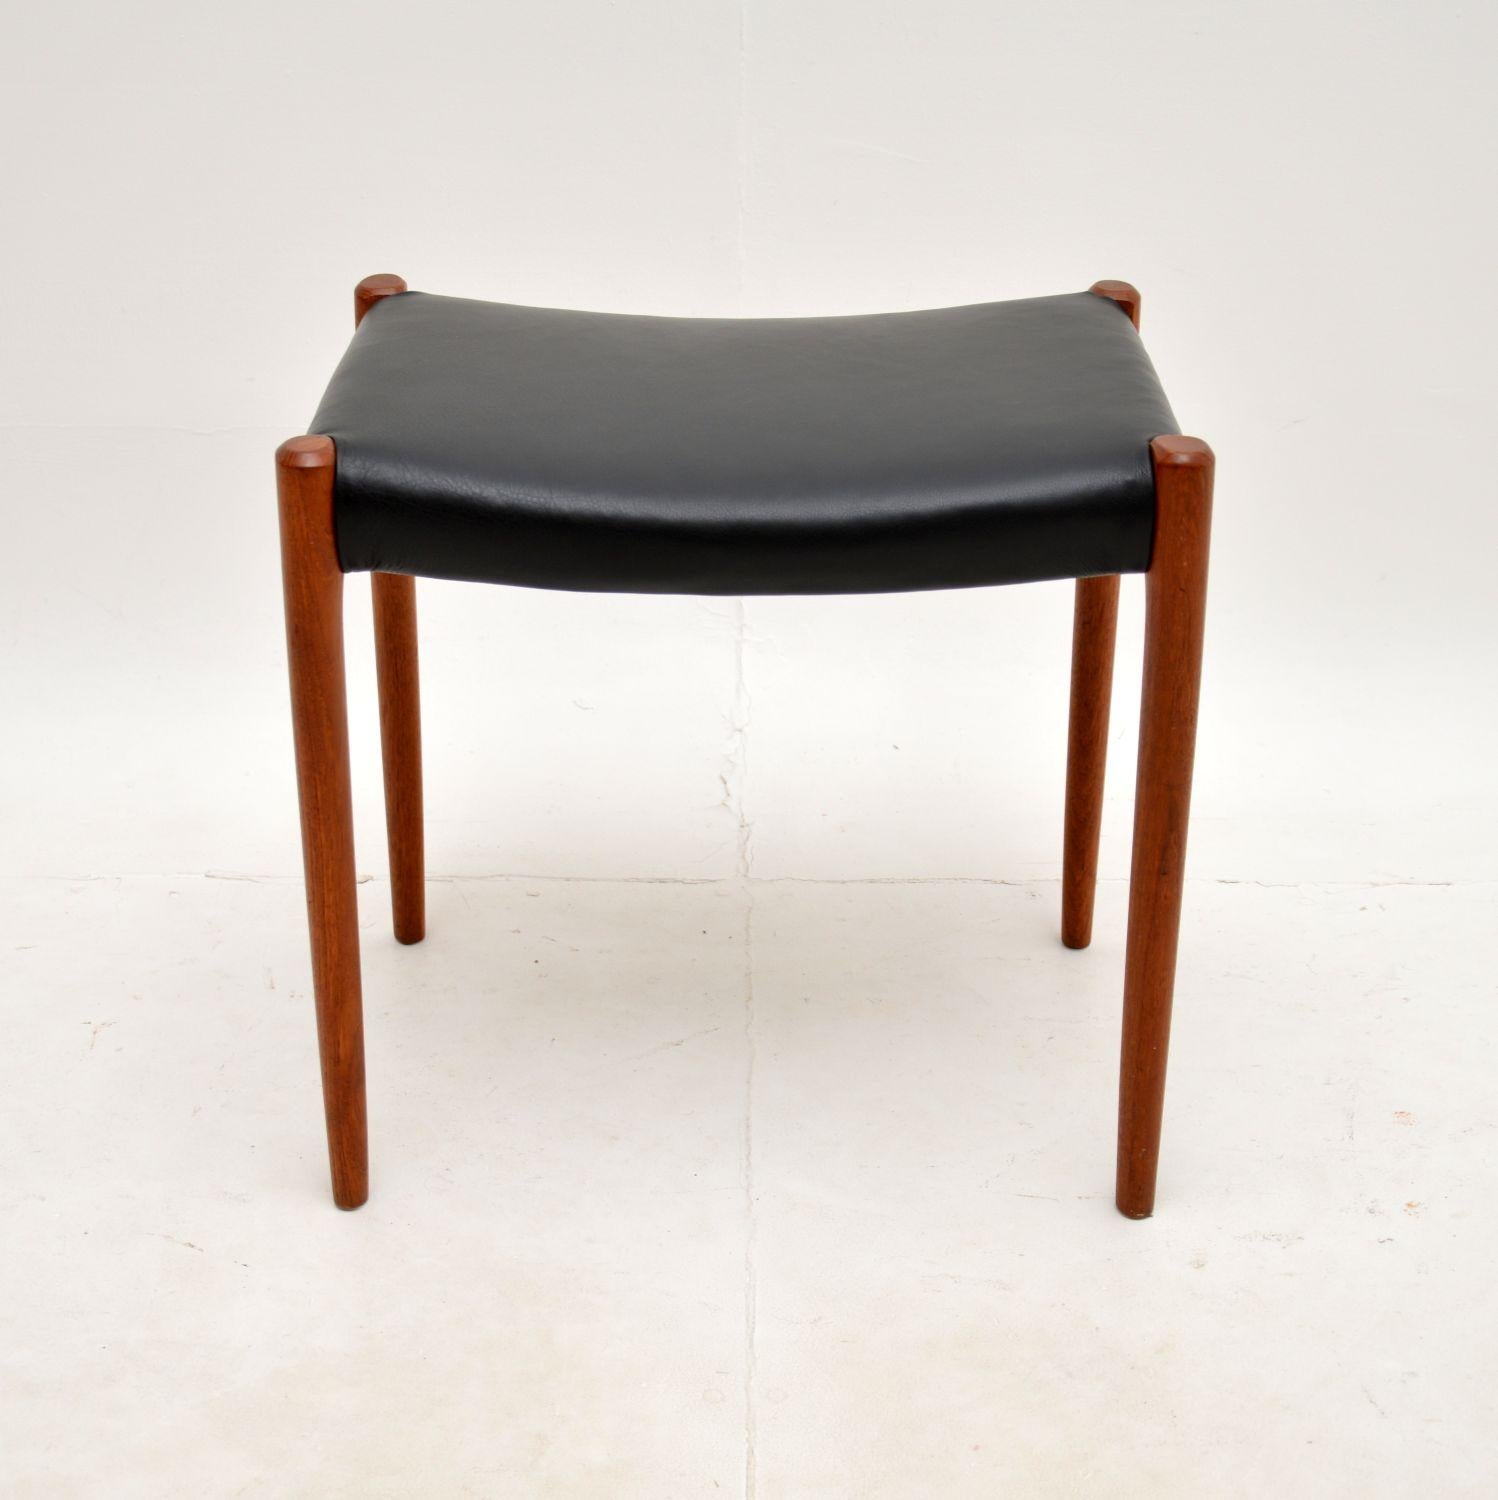 A stylish and extremely well made Danish vintage teak and leather stool by Niels Moller. This was made in Denmark, it dates from the 1960’s.

As with all Niels Moller designs, the quality is outstanding, this is beautifully designed, sitting on